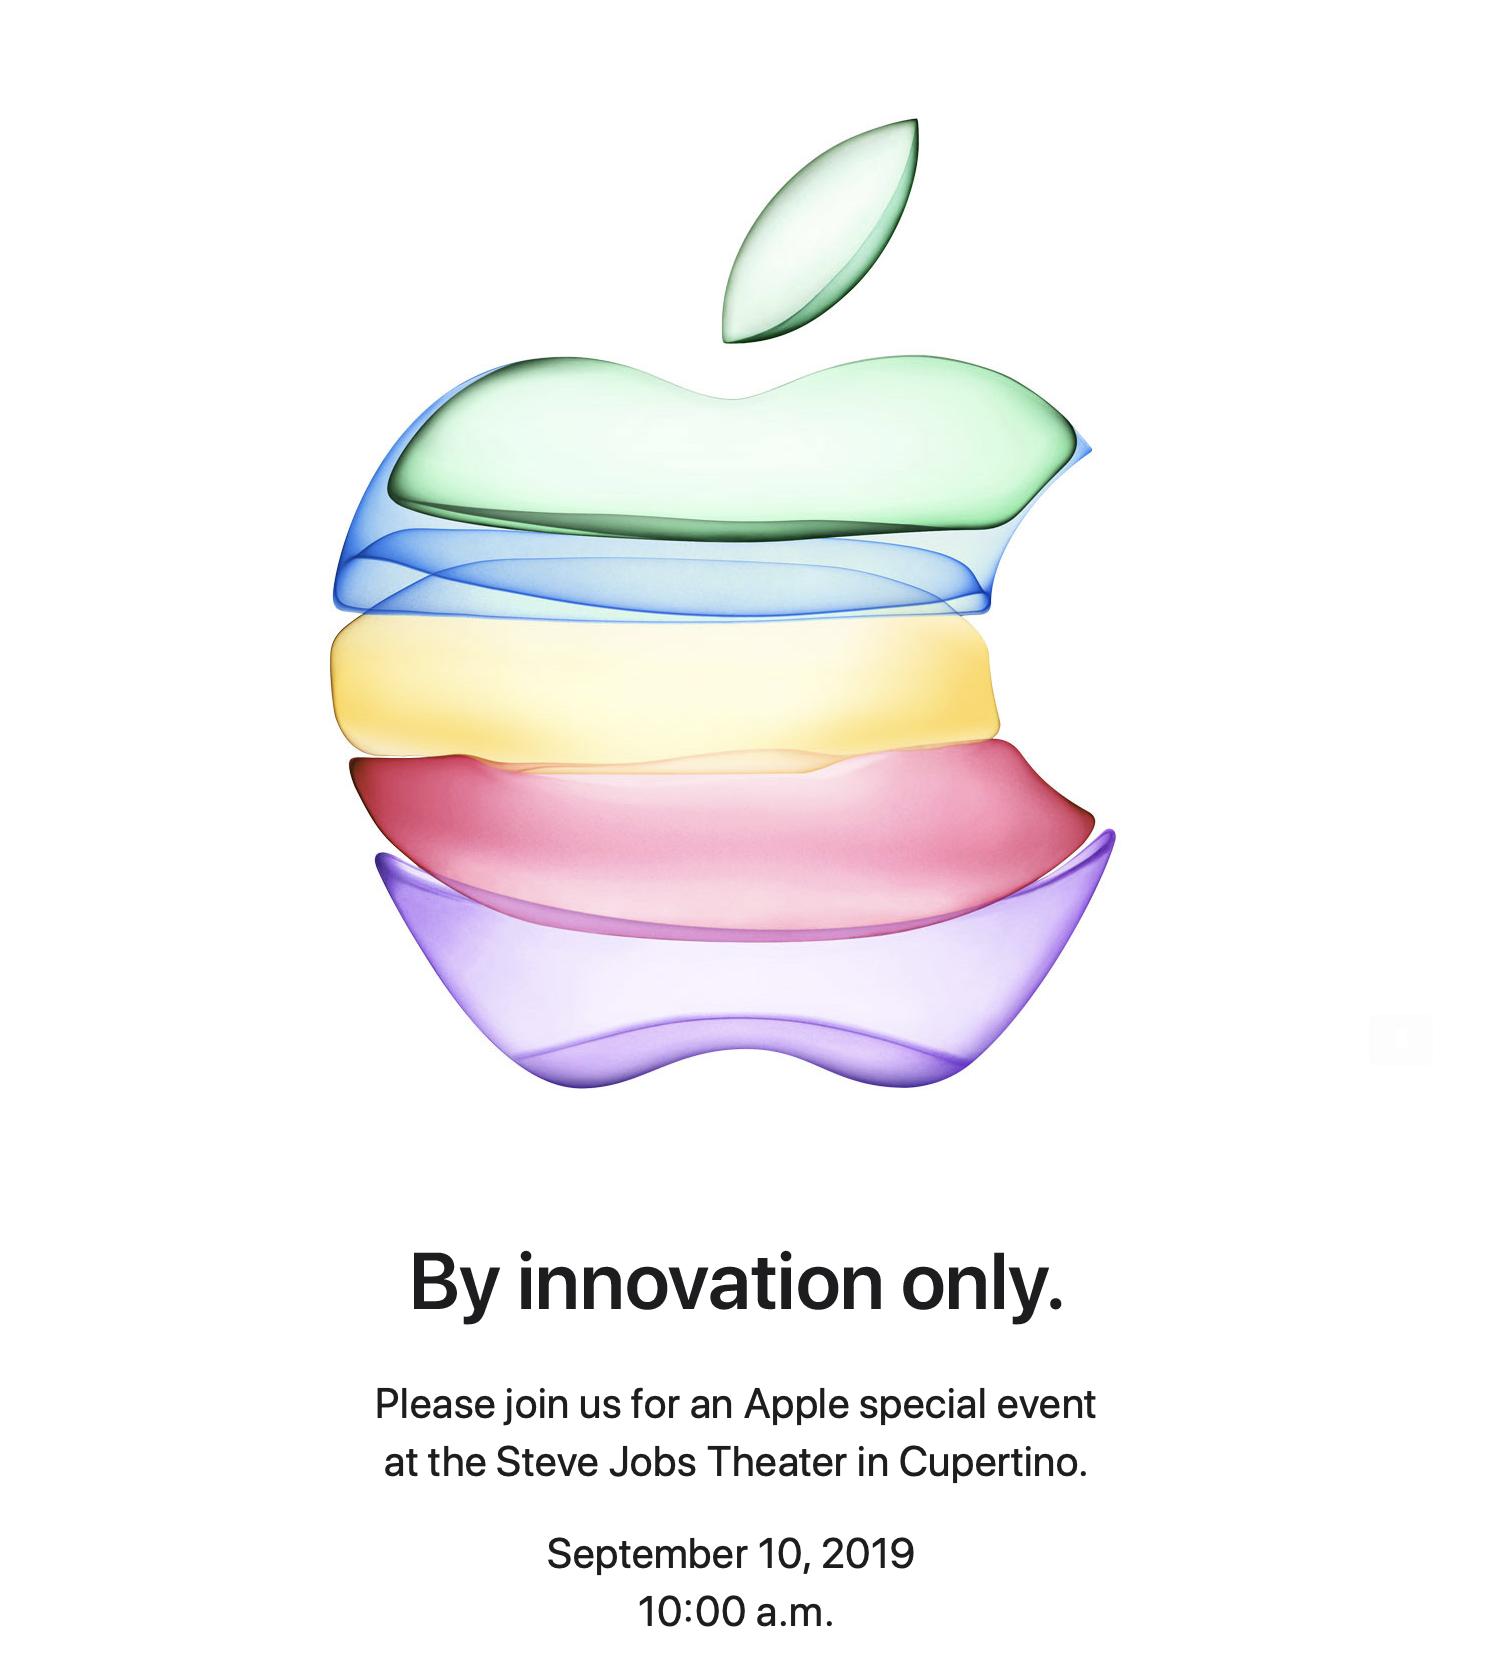 Apple's 'By Innovation Only' Invitations Confirms iPhone Event to be Held Sept. 10